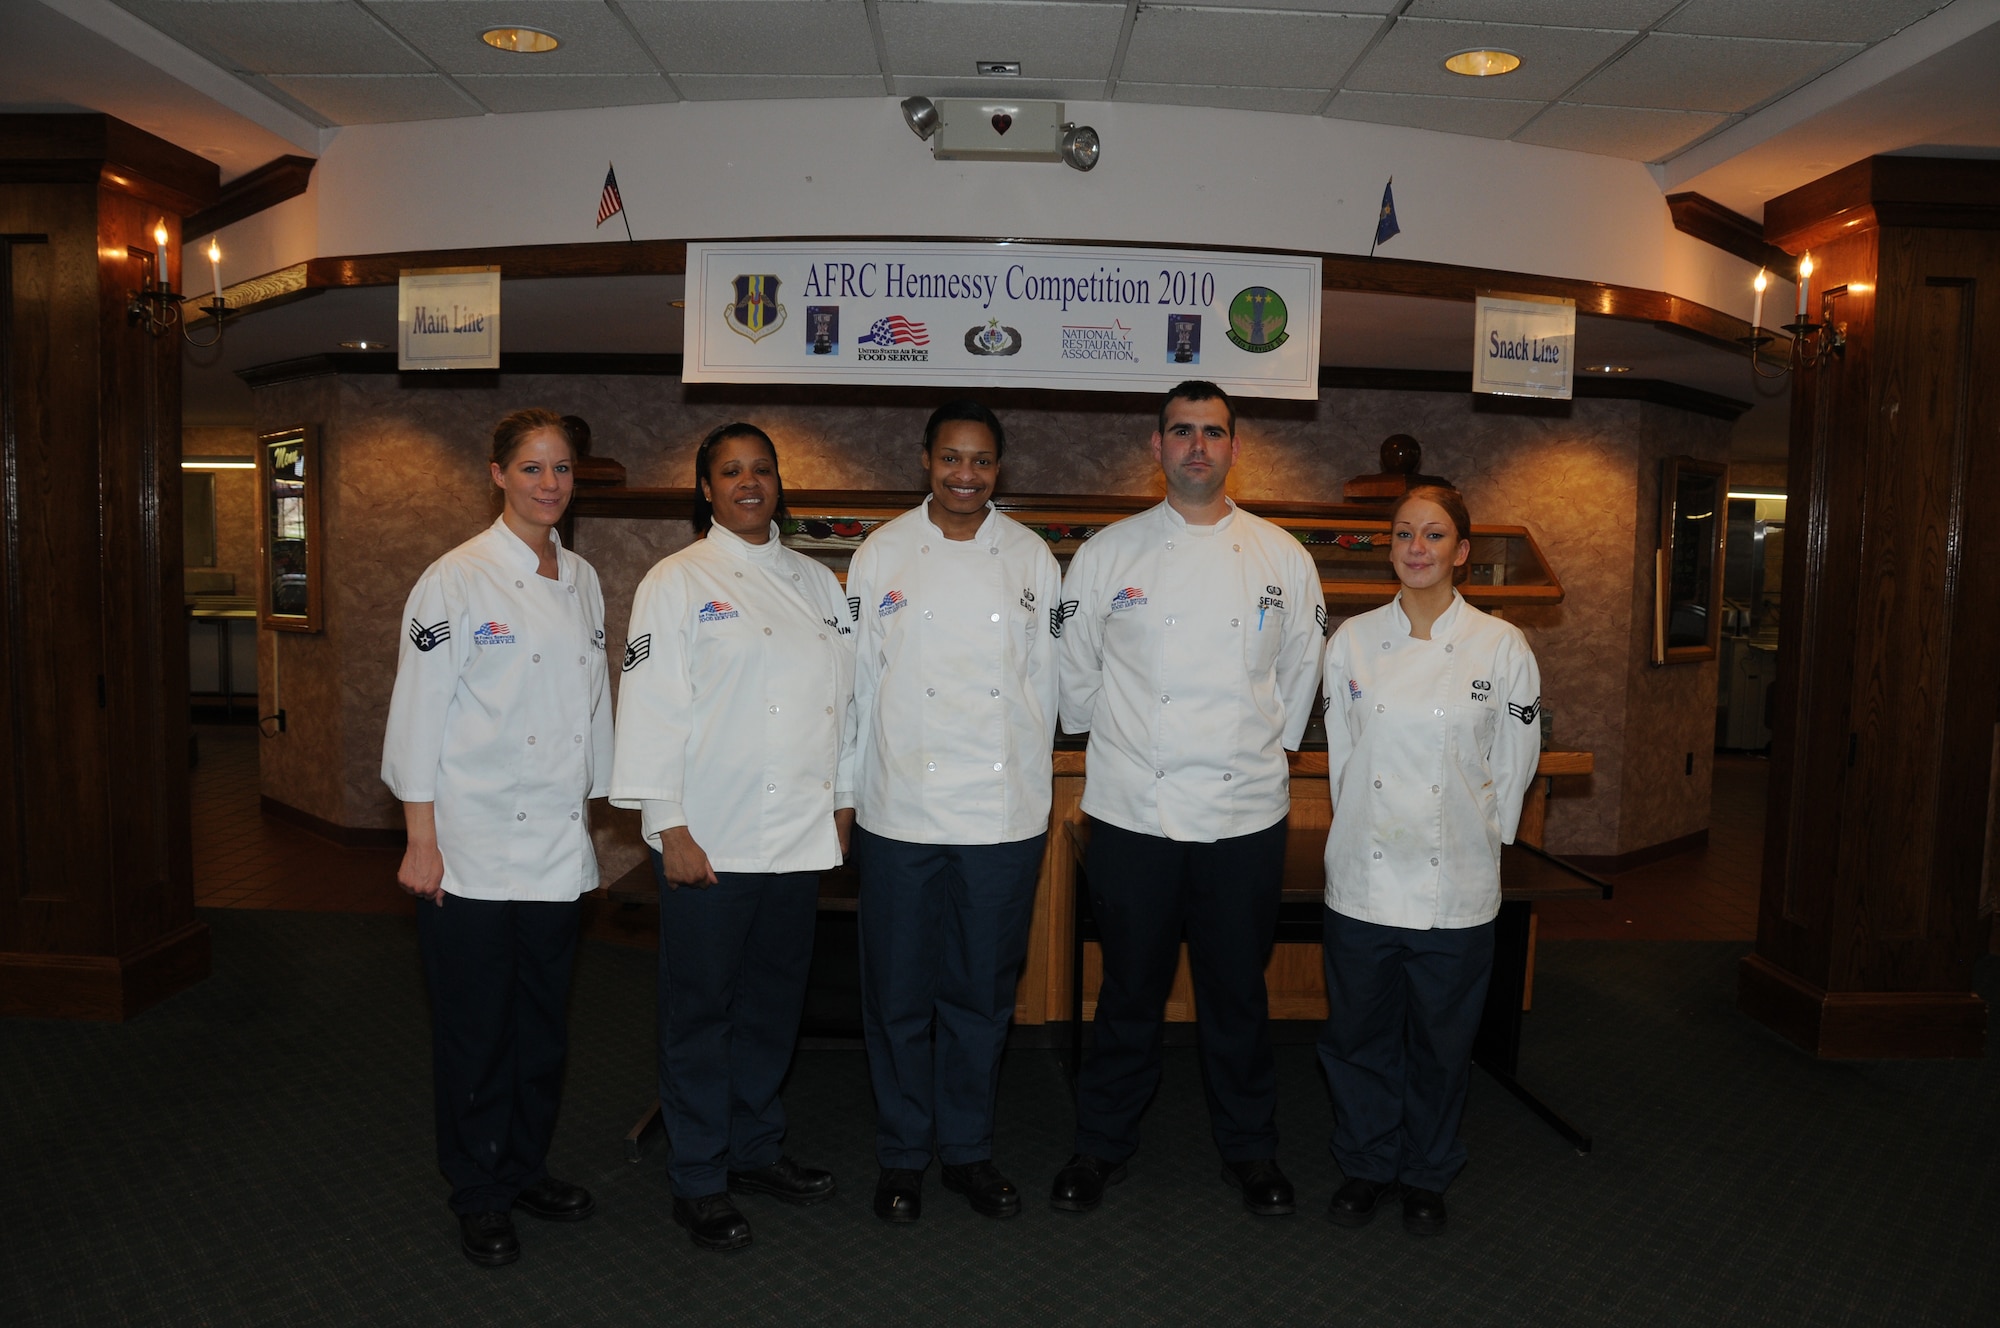 From left to right Team B consisted of food service specialists Senior Airman Sarah Kowalczyk, Staff Sgt. Patricia Fountaine, Tech. Sgt. Deonza Eady (Team B's trainer), Senior Airmen David Siegel, and Emily Roy. (U.S. Air Force photo/Staff Sgt. Peter Dean)


The team was led by trainer Tech. Sgt. Deonza Eady with food service specialists Staff Sgt. Patricia Fountaine, Senior Airmen David Siegel, Sarah Kowalczyk, and Emily Roy.
